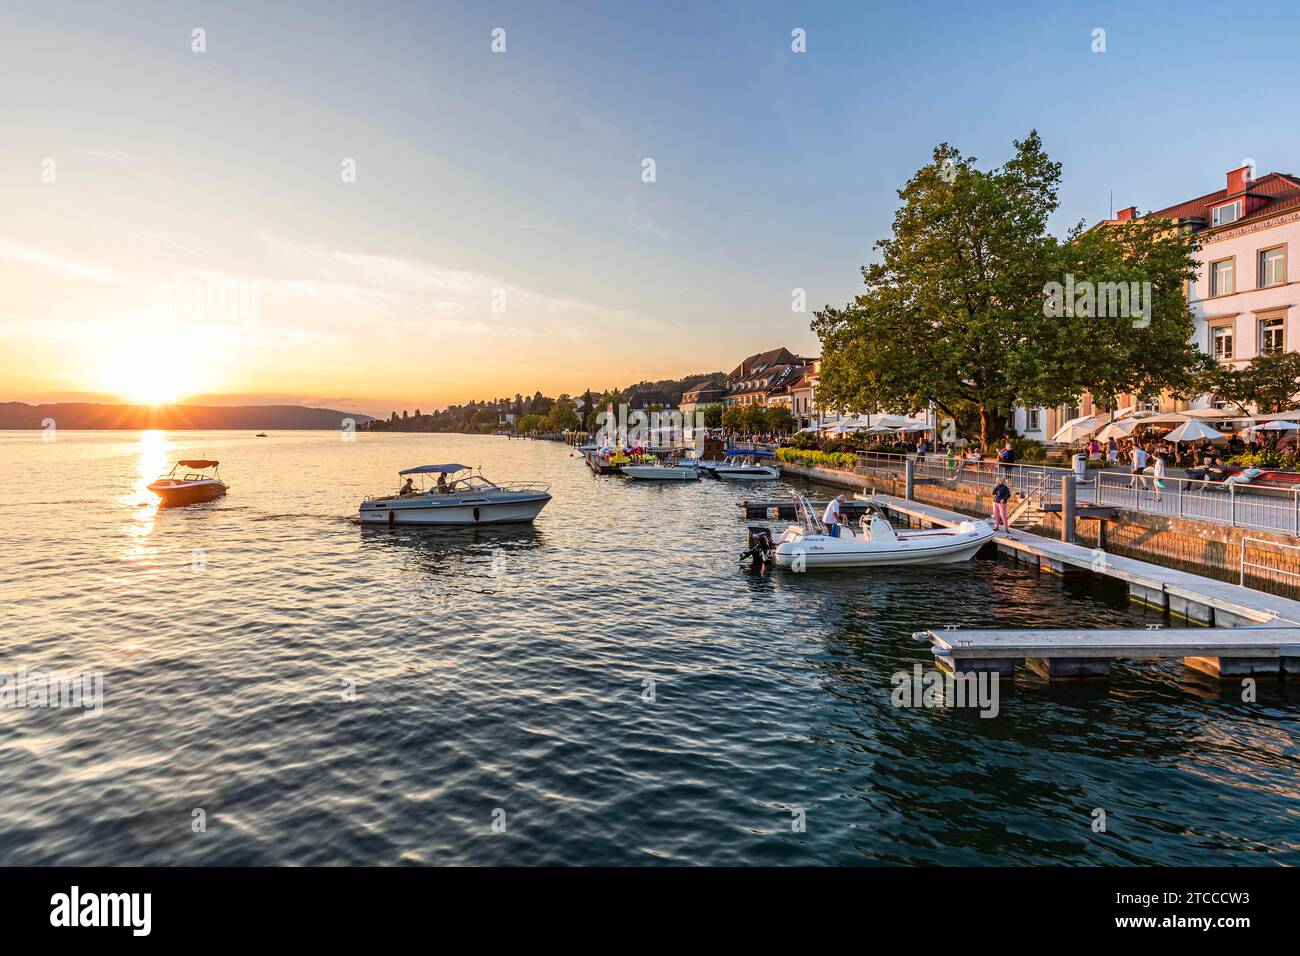 Motorboats and restaurants on the lakeside promenade in Ueberlingen, Lake Constance, Baden-Wuerttemberg, Germany Stock Photo